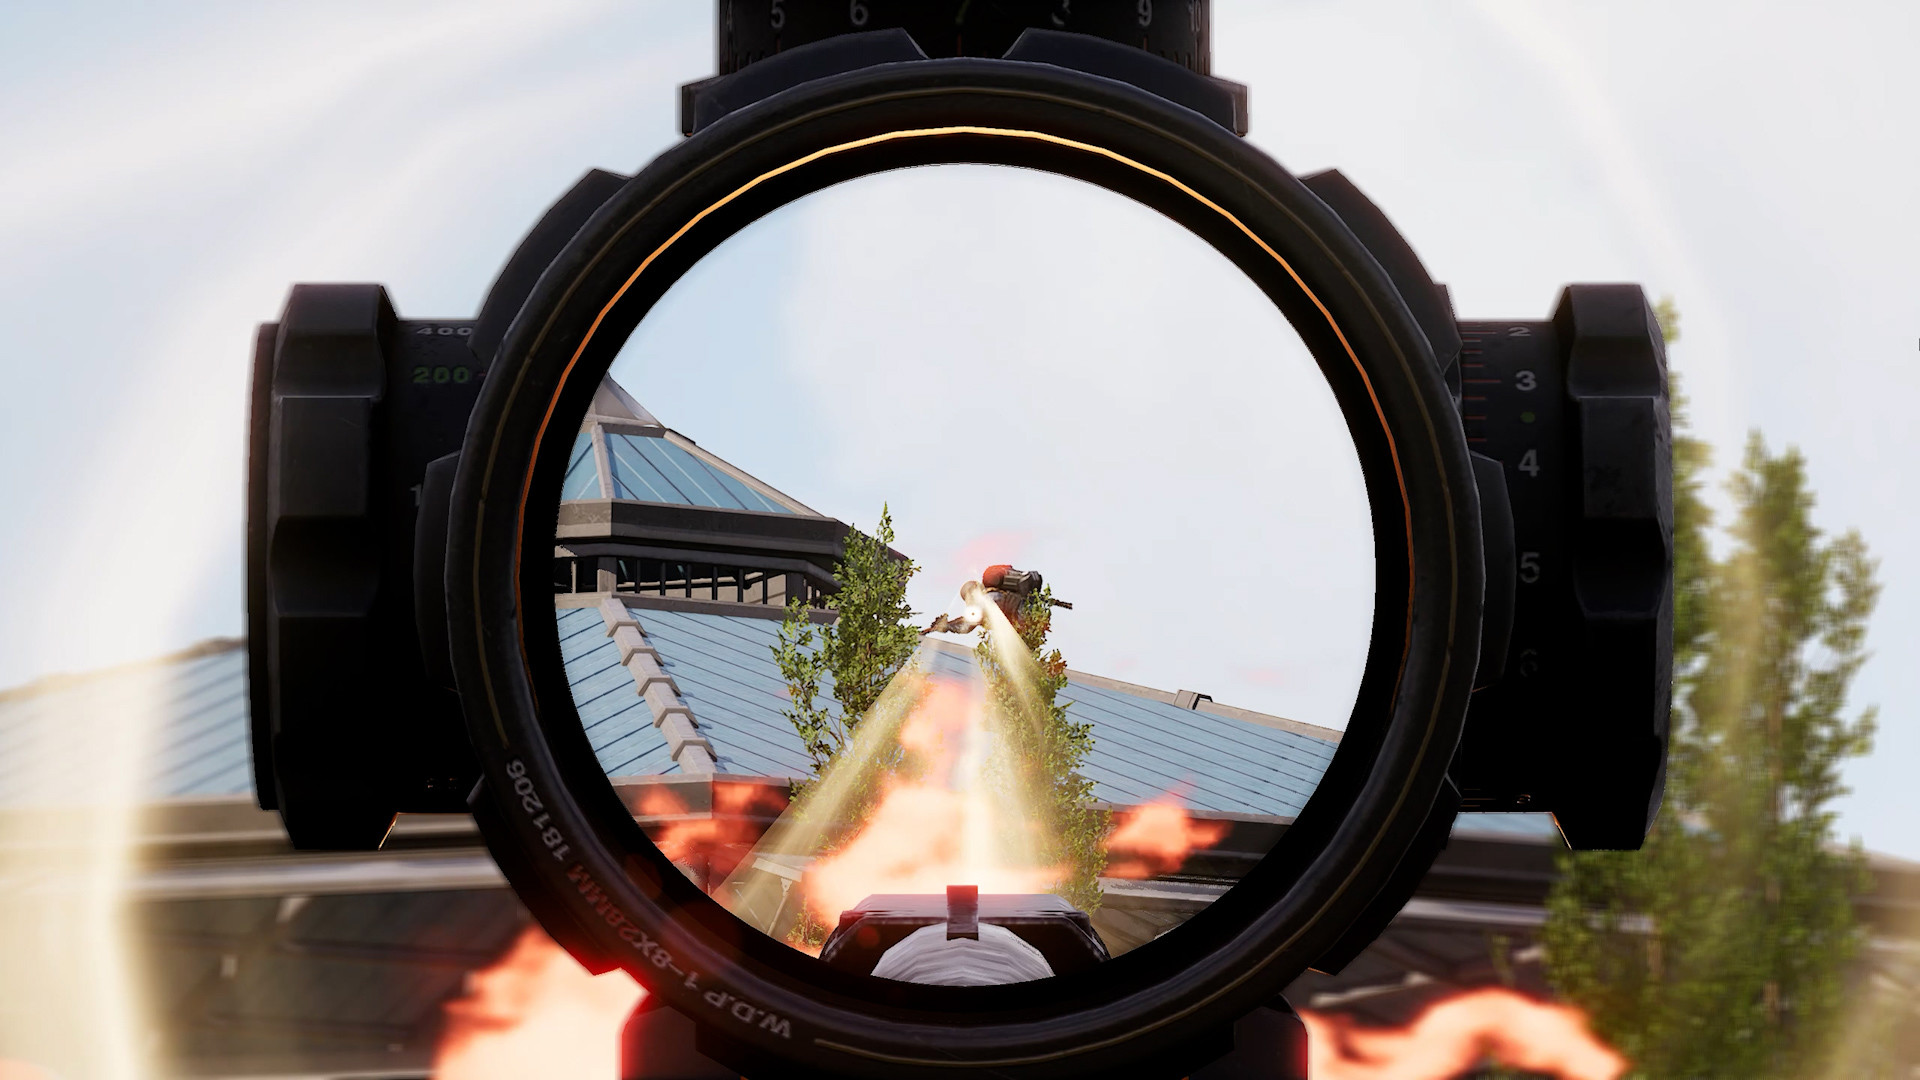 aiming down an ACOG scope in Super People